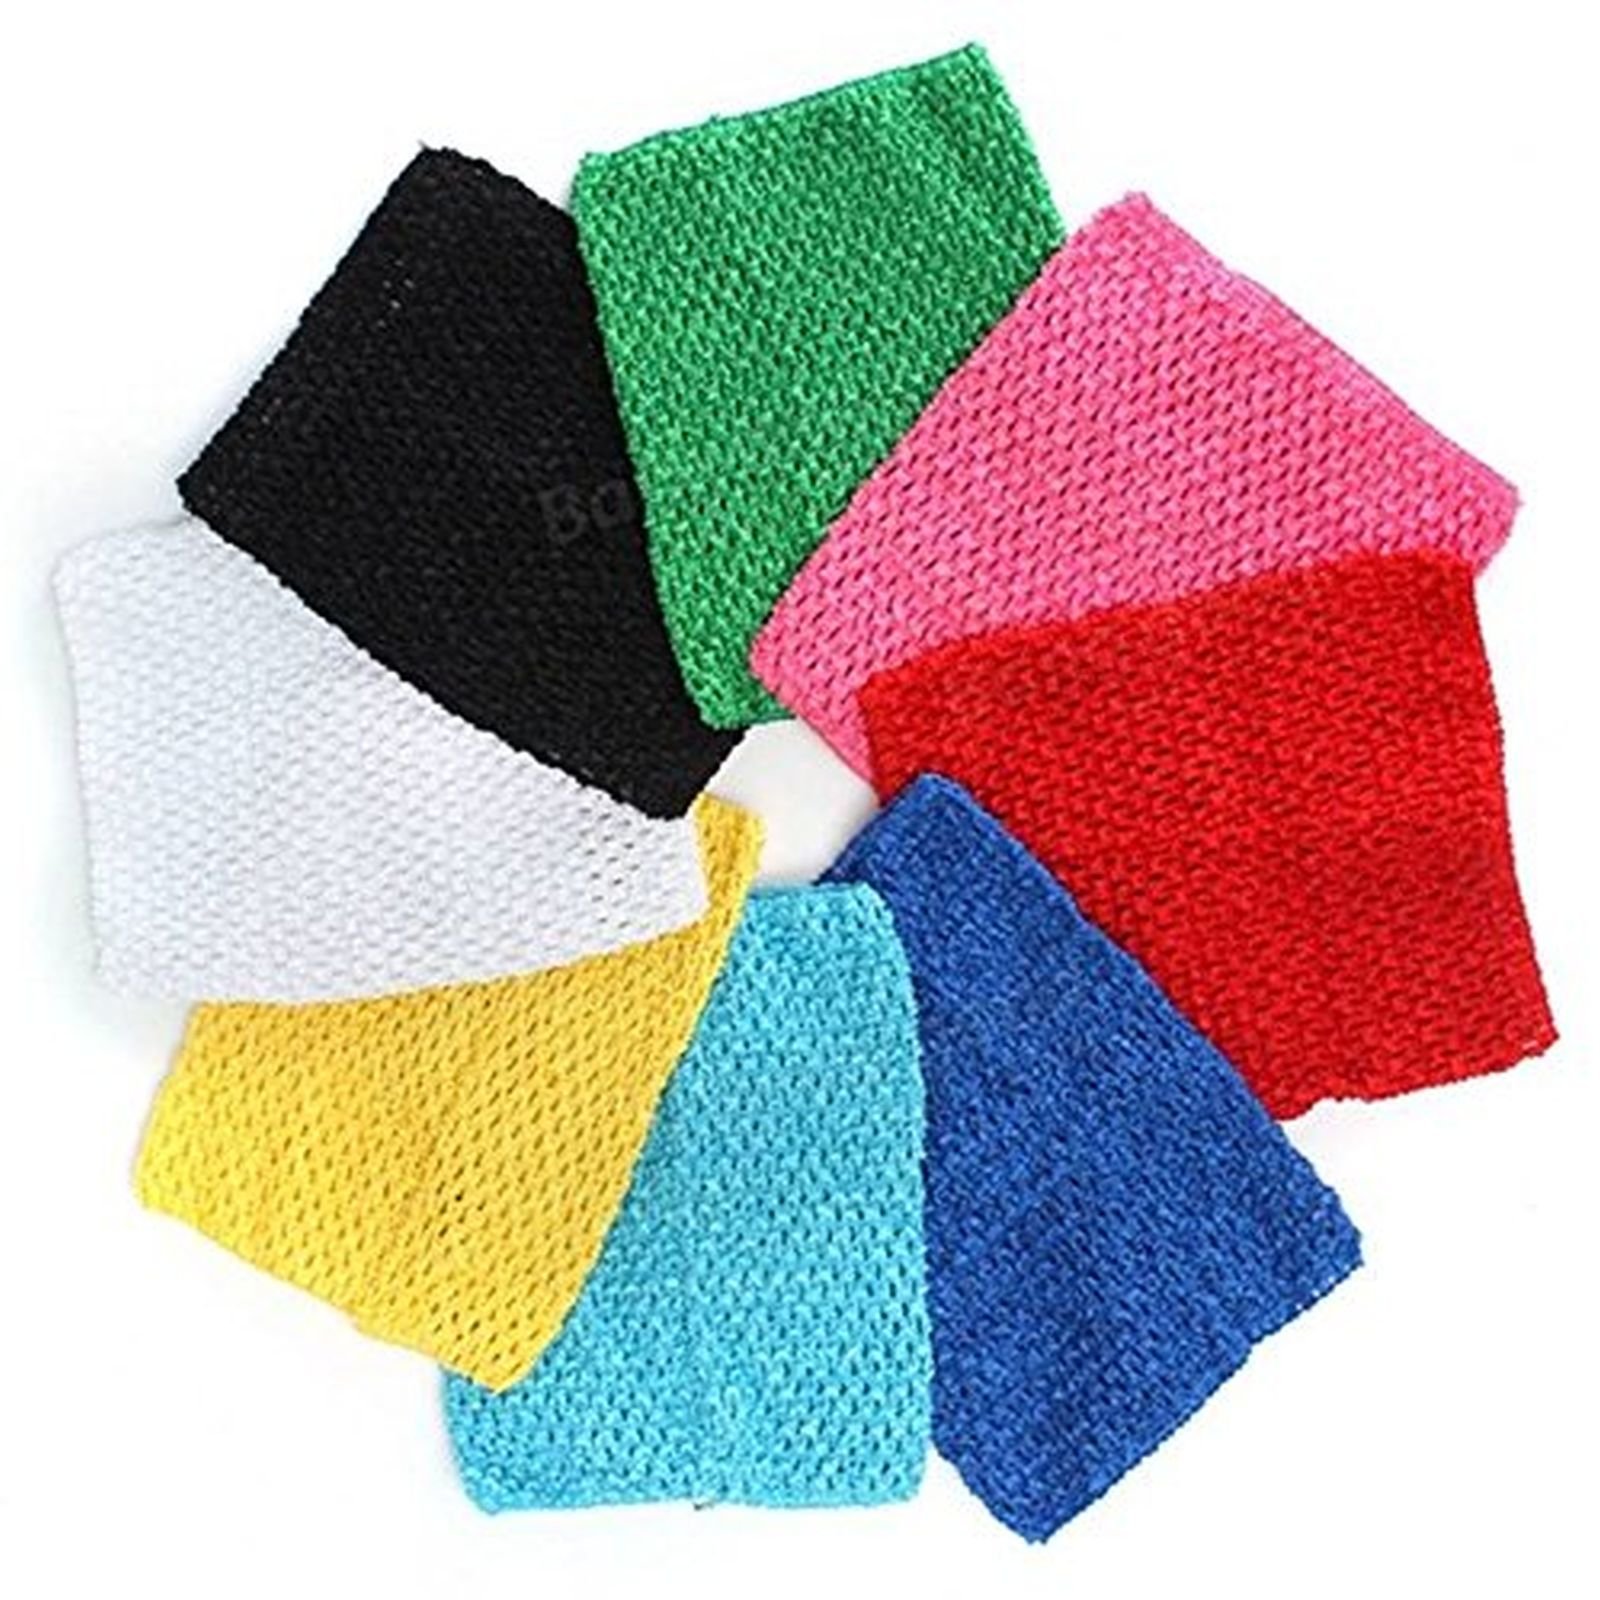 The length of the each headband is roughly 14.5 cm/5.7 inch, width is roughly 4cm/1.57inch Assorted Colors: Package comes with 24 pcs of headbands in white, black, blue, green, red, yellow, orange, pink, purple (Random Mixed) One Size: elastic super stretchy headband will fit girls and toddlers. These are comfortable and light, perfect for during outside activity and your stay at home Various different colors give you an ideal option to choose and match on any colors of you or infant outfit and mood. (Please be aware that some colors may differ from the picture) Great Gift: Ideal product for your loved one, will be thankful with this stylish adorable beautiful looking headbands